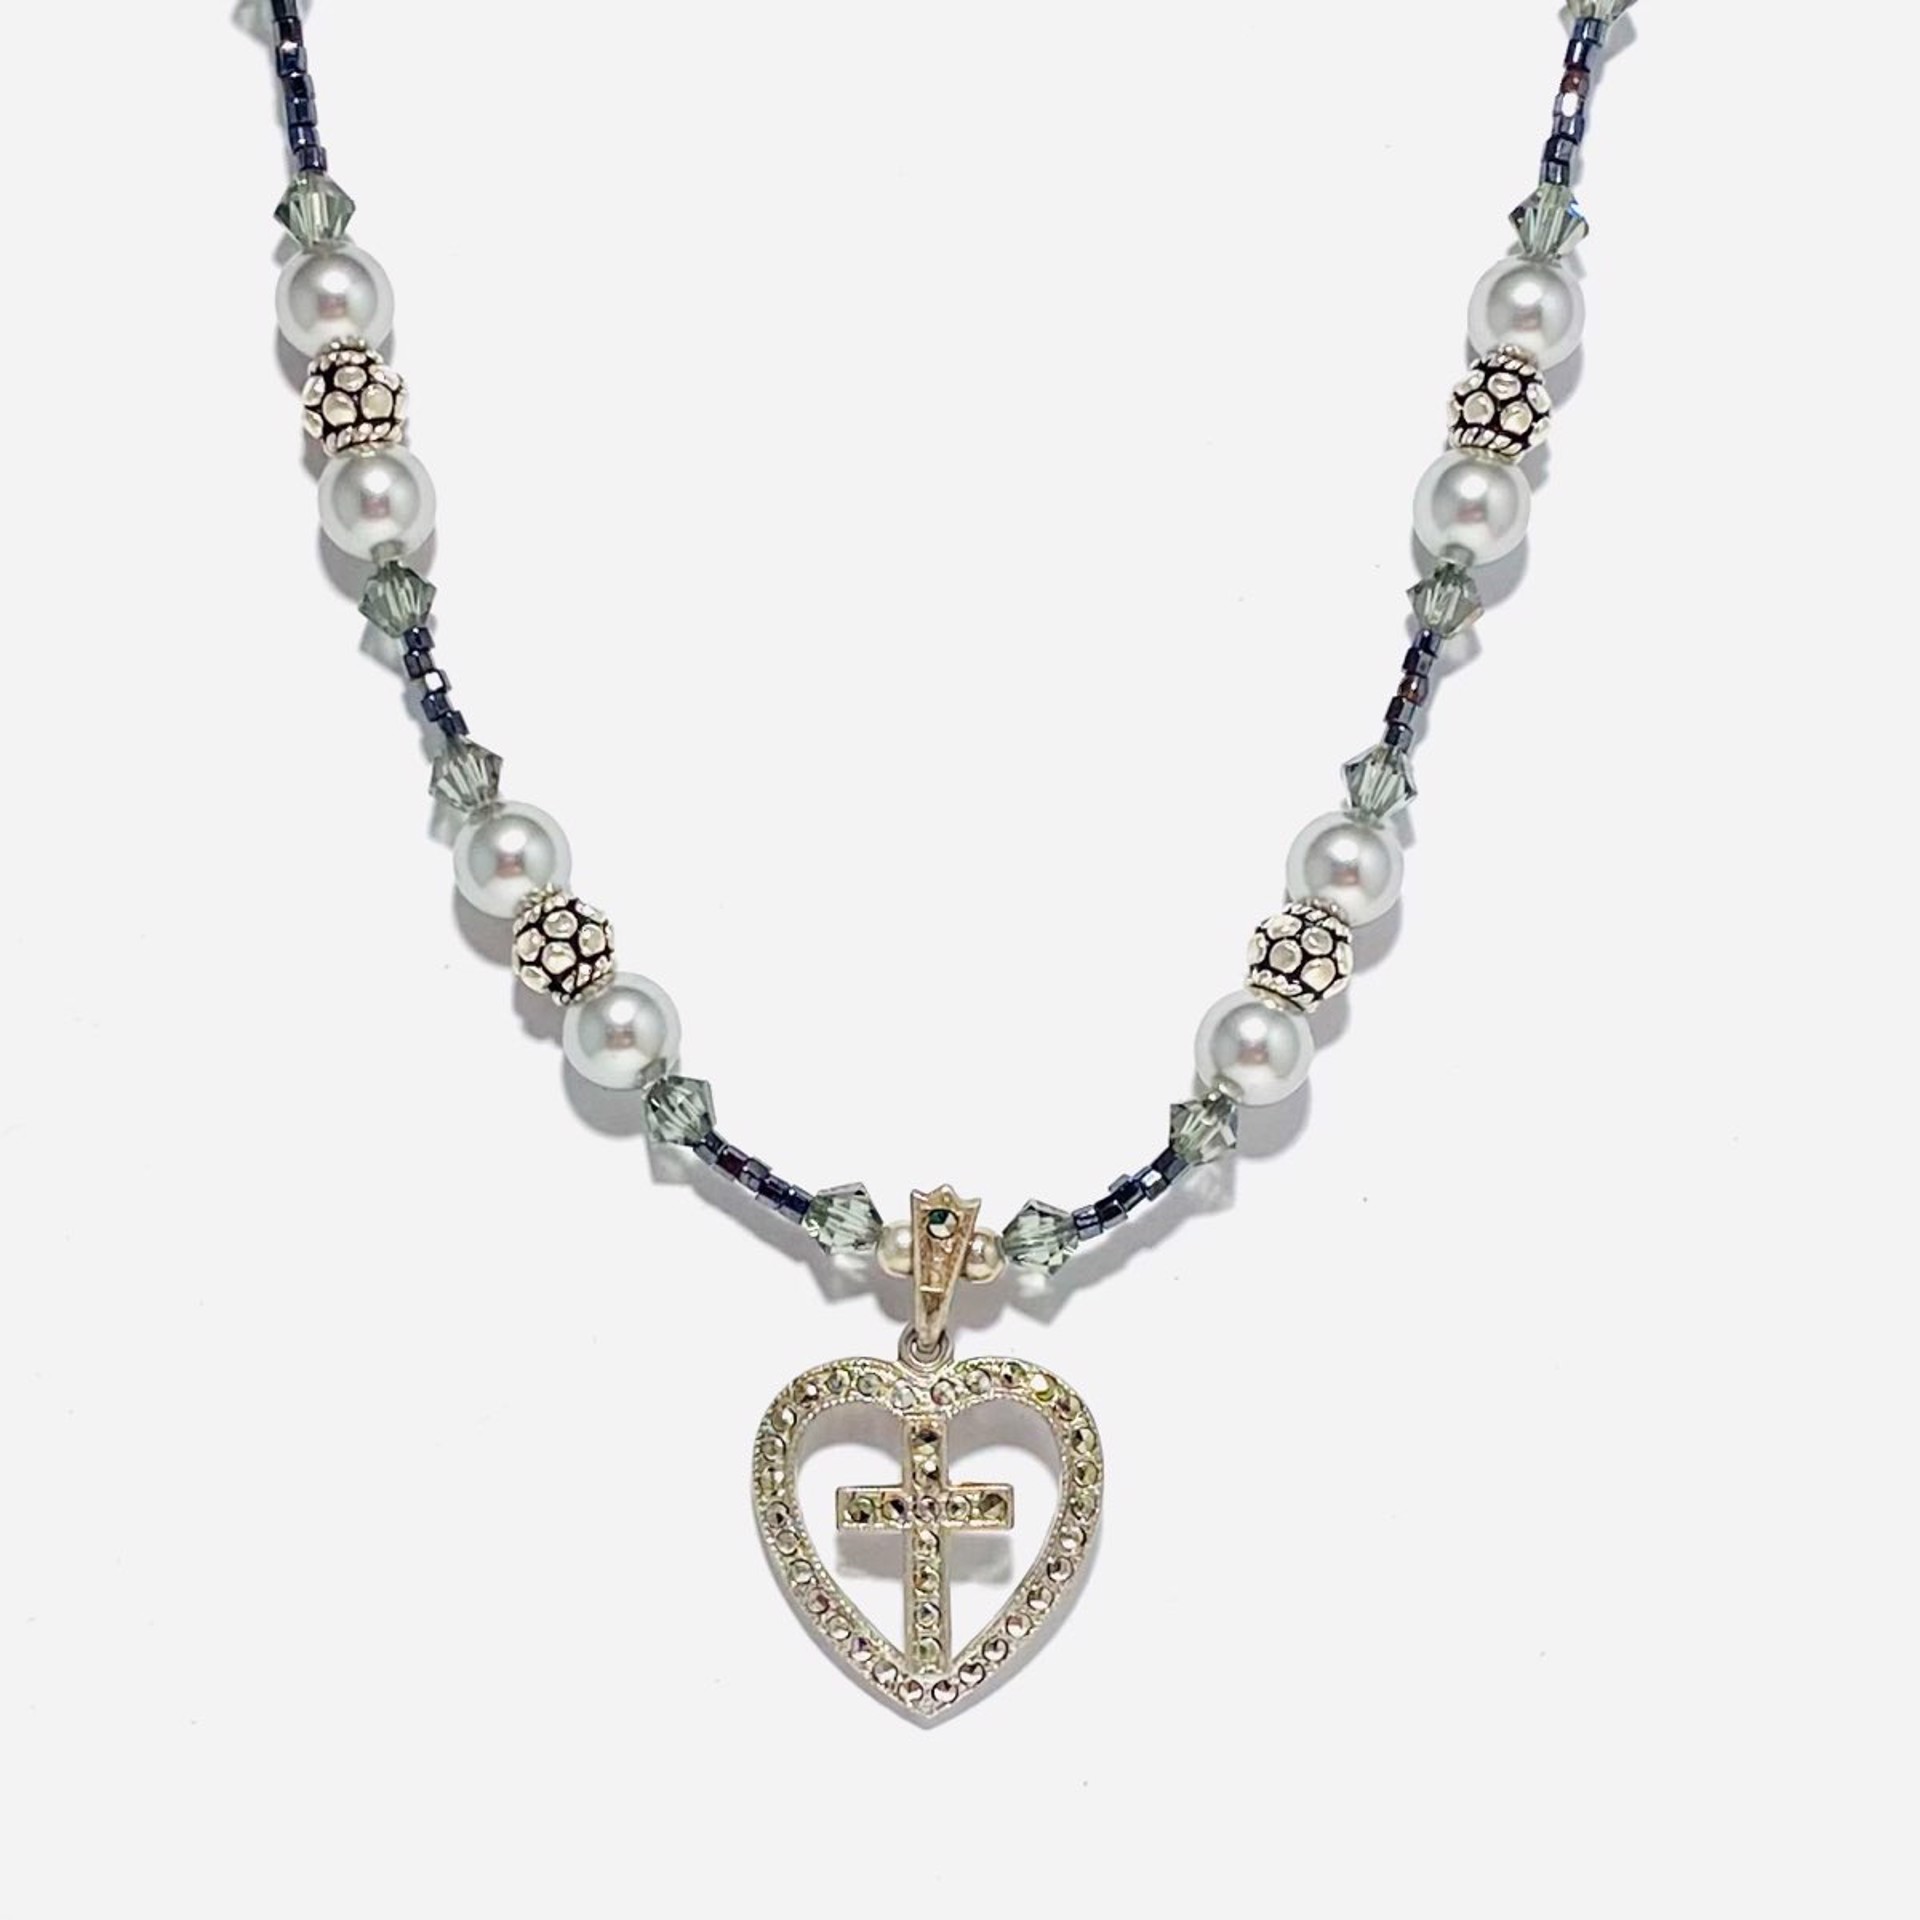 SHOSH22-49 Marcasite Vintage Cross and Heart 18" Necklace by Shoshannah Weinisch